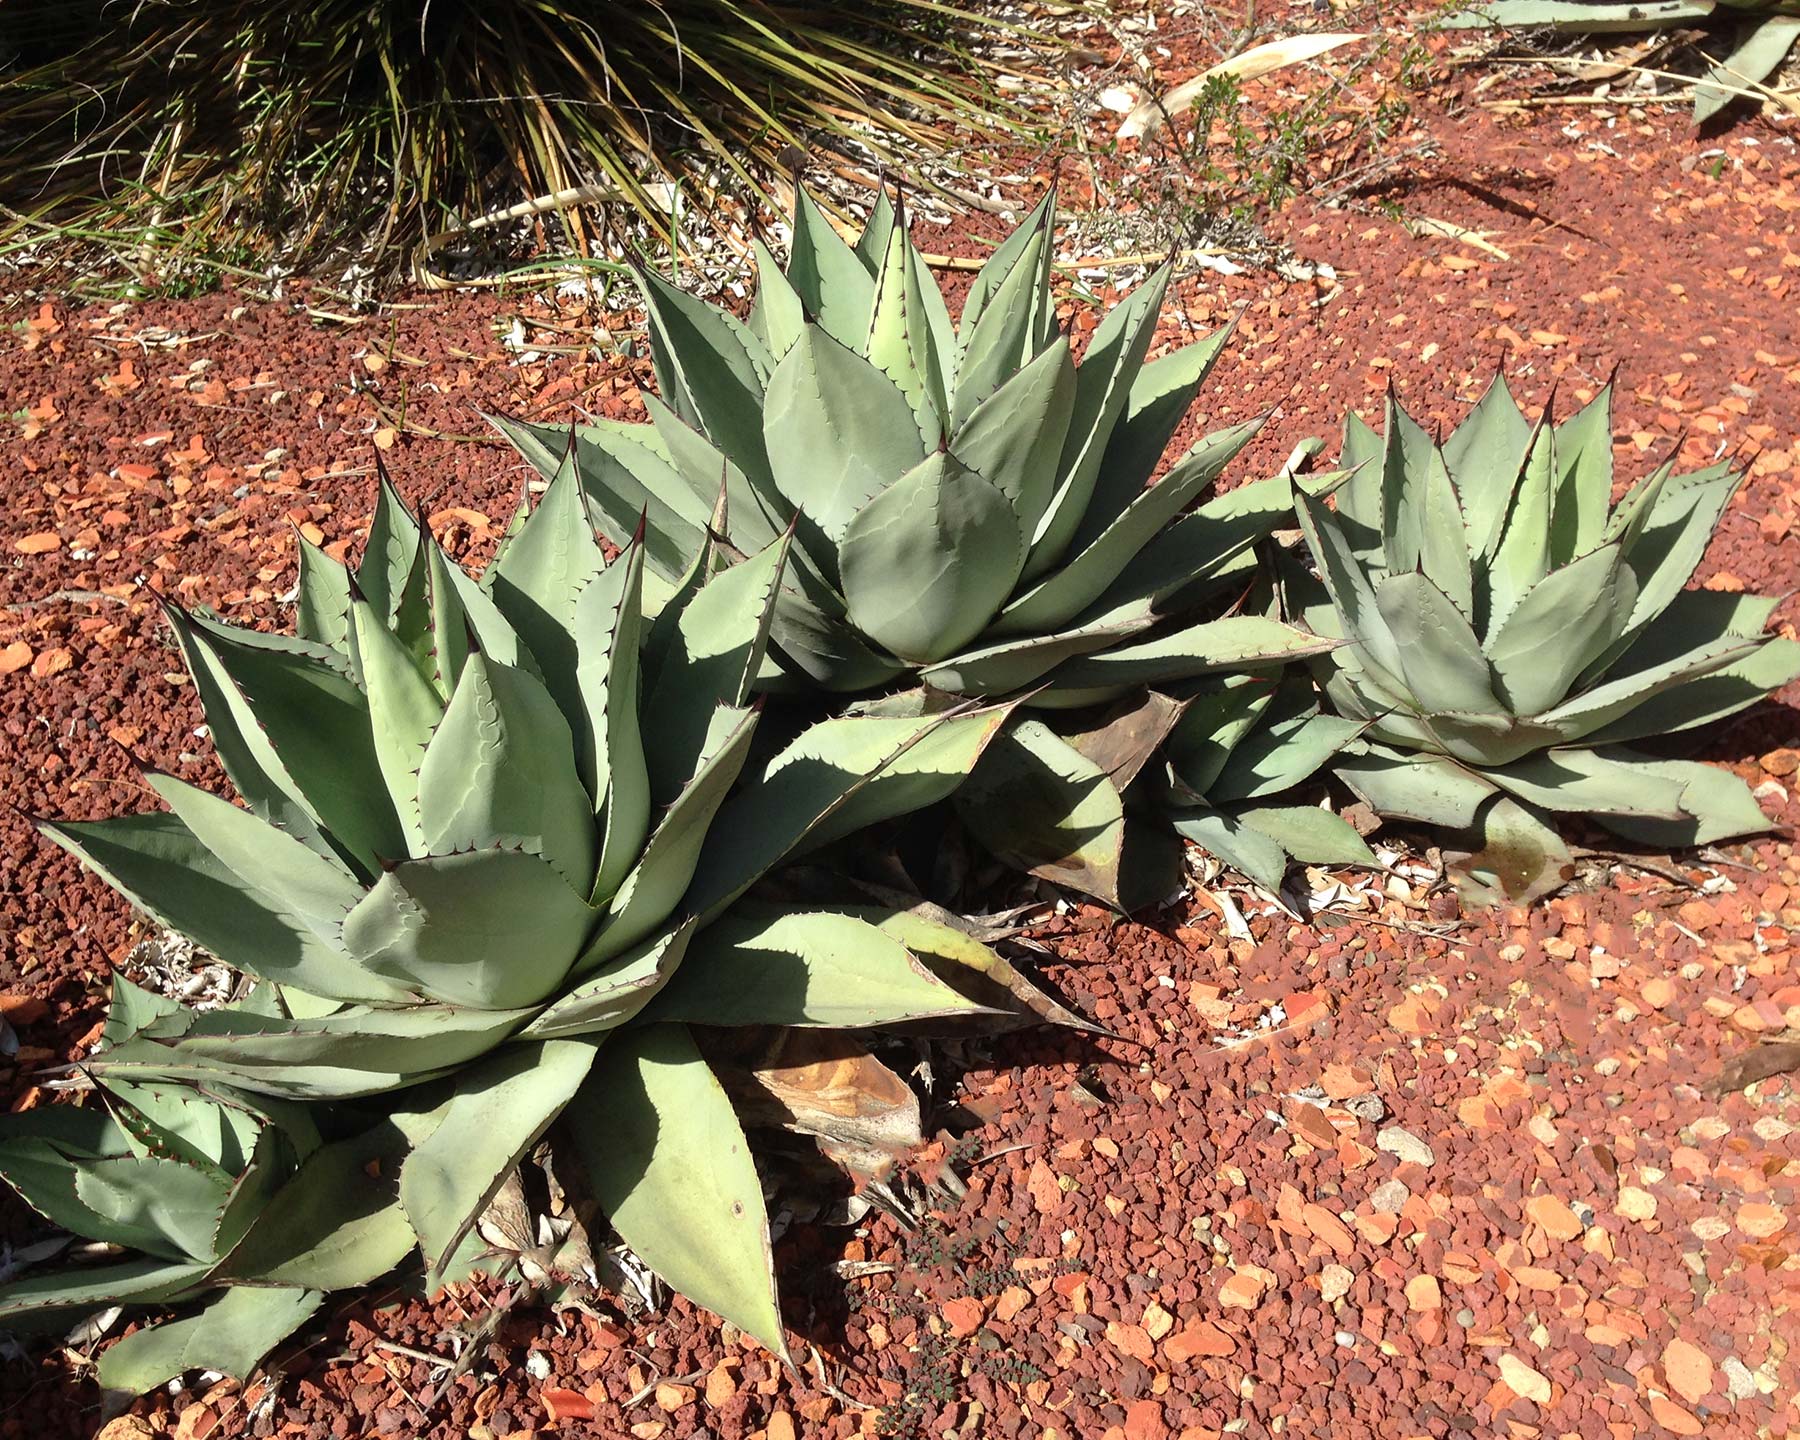 Agave flexispina planted in group